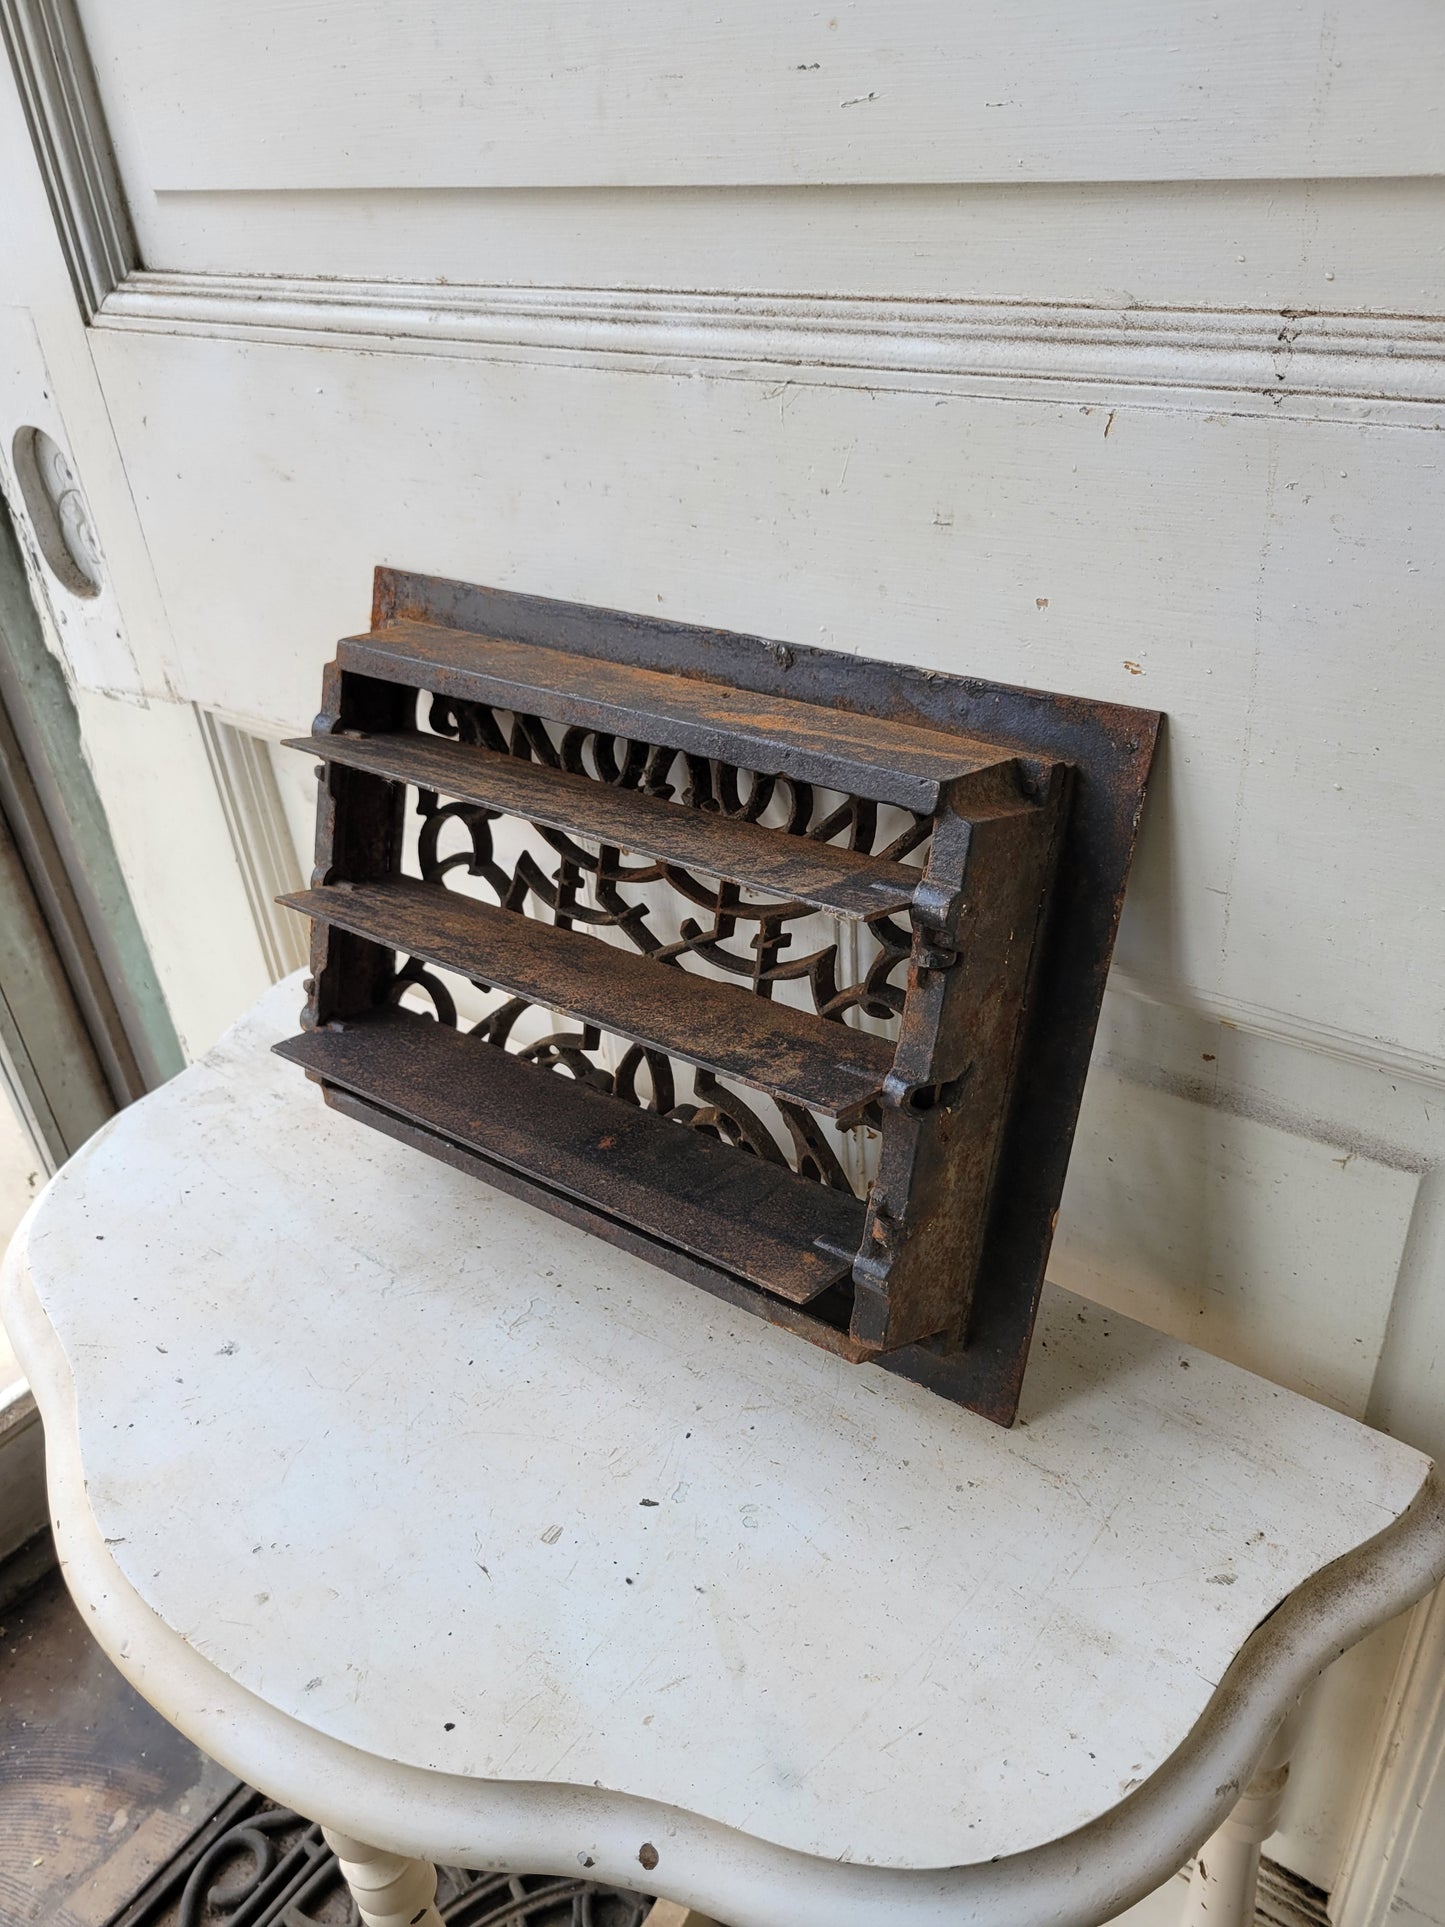 14 x 10 Antique Working Vent Cover, Decorative Iron Register Cover #012805